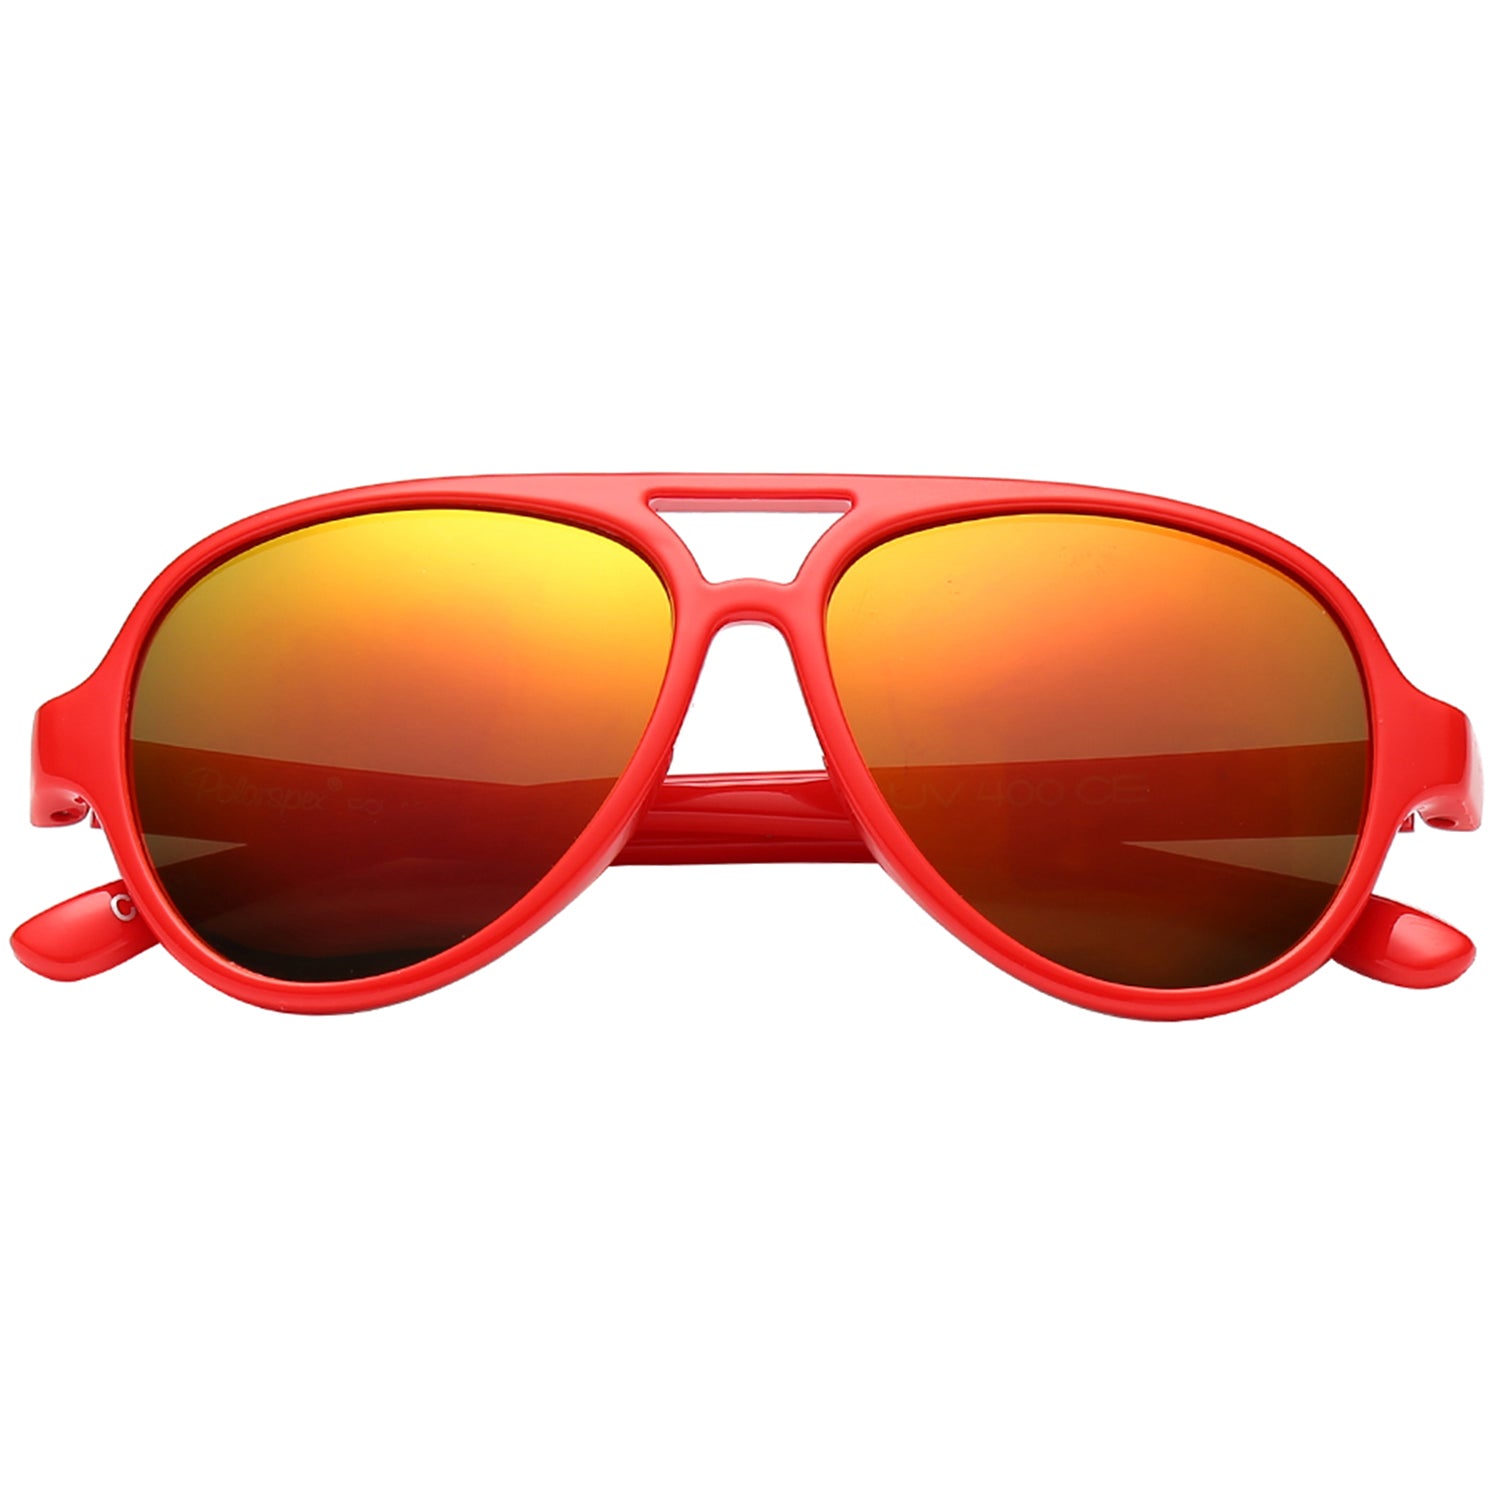 Polarspex Polarized Bendable Aviator Pilot Sunglasses with Scarlet Red Frames and Polarized Lava Red Lenses for Boys and Girls (Ages 2 - 8)